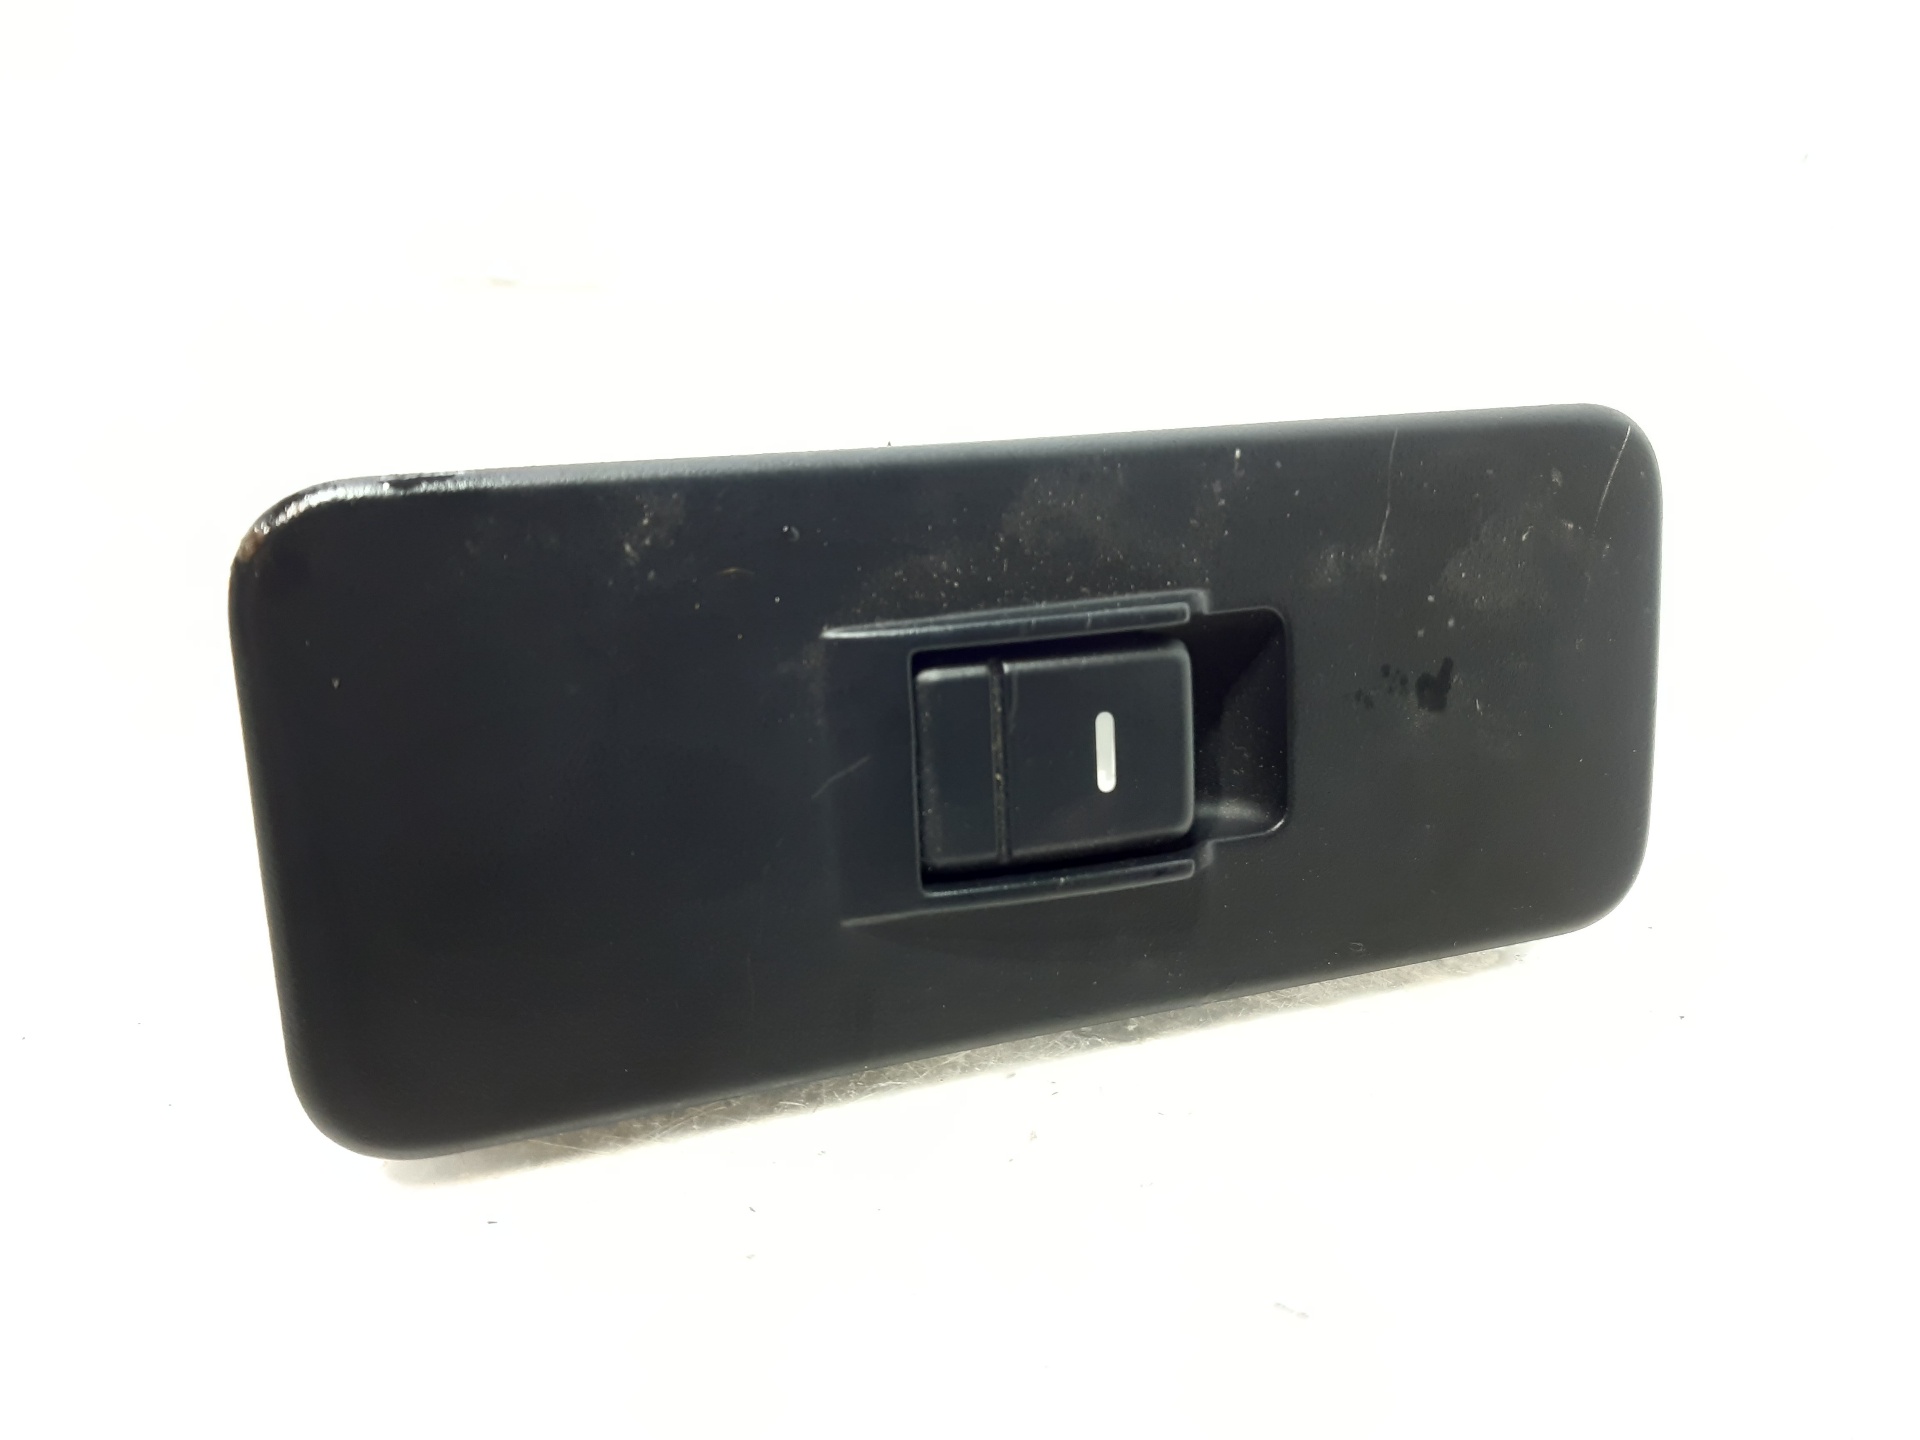 LAND ROVER Discovery 3 generation (2004-2009) Rear Right Door Window Control Switch YUD501070PVJ 24132009